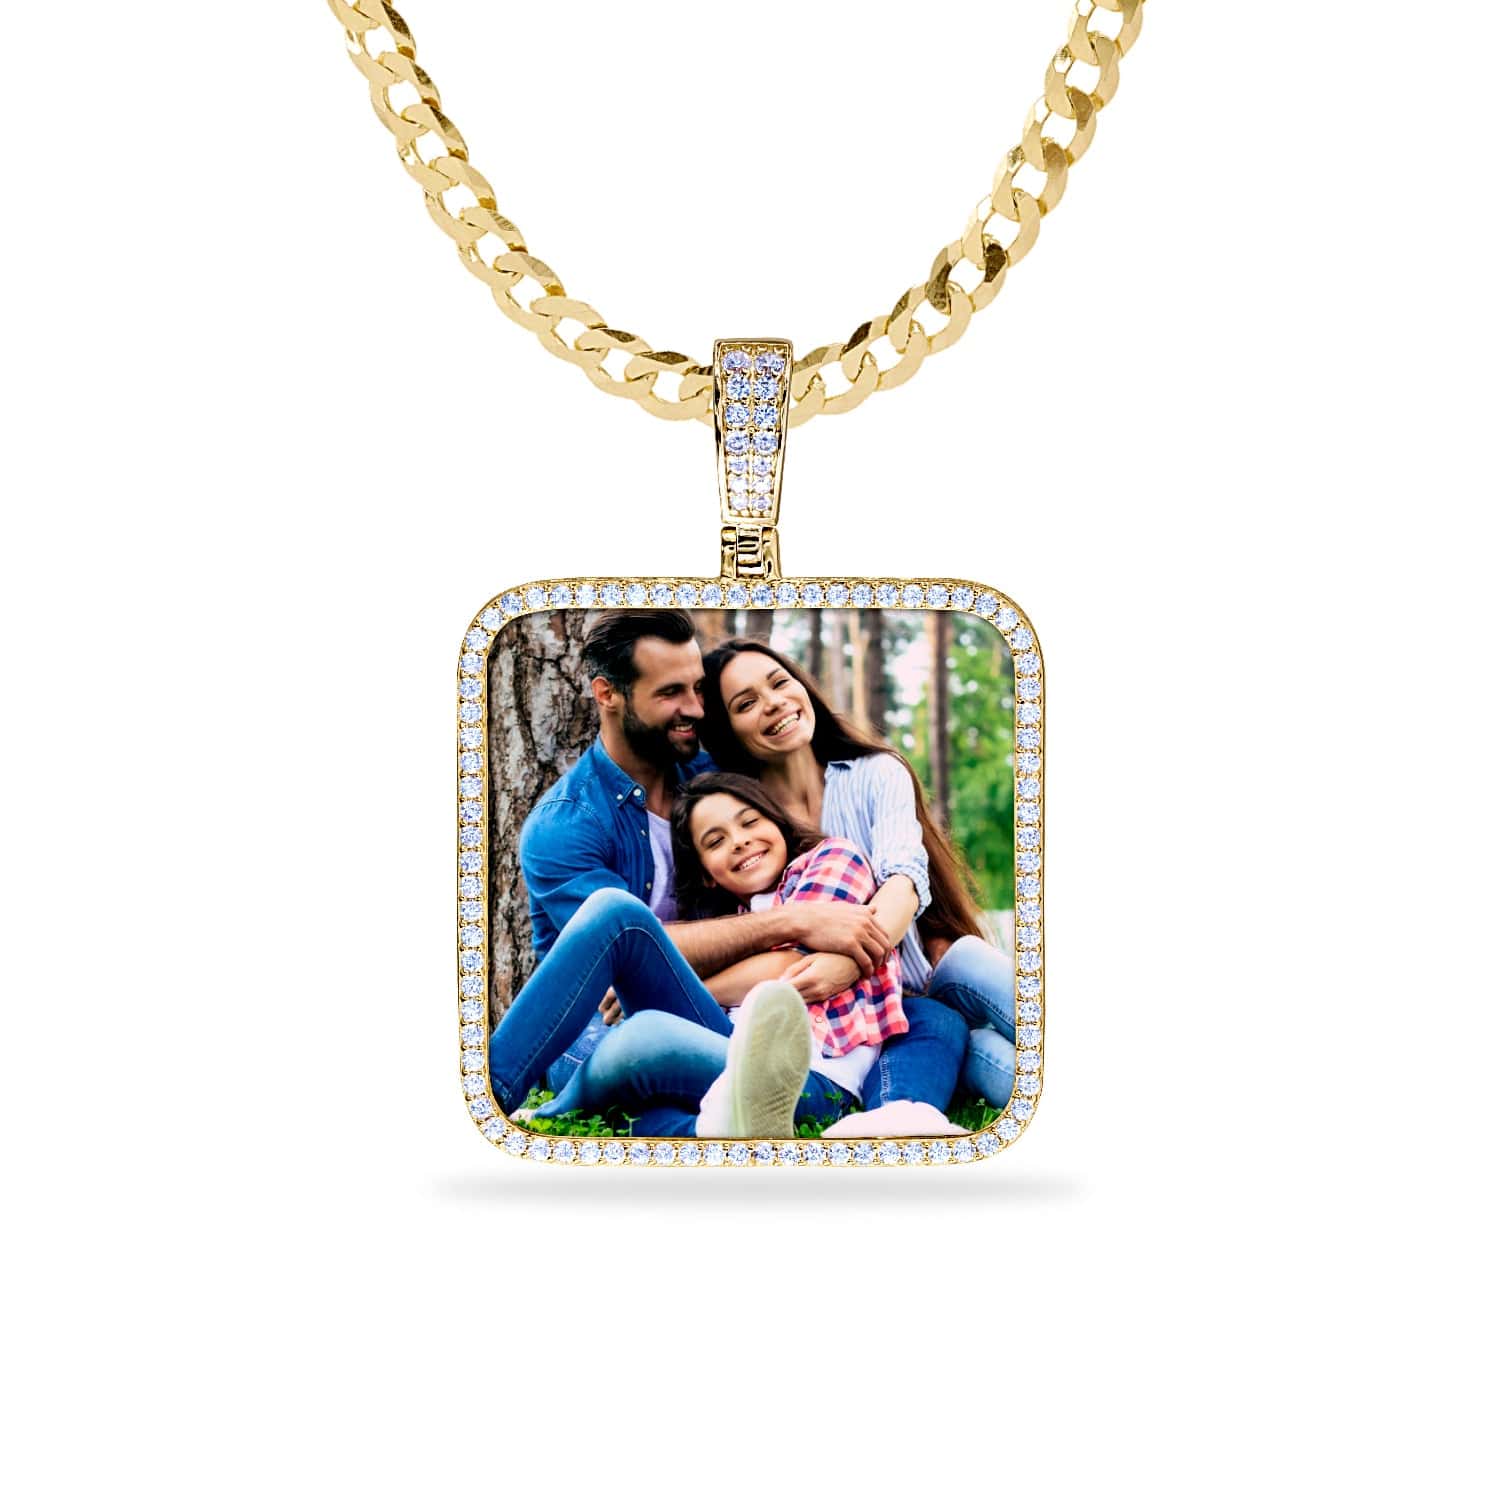 14k Gold over Sterling Silver / Cuban Chain Iced Out Square Photo Pendant